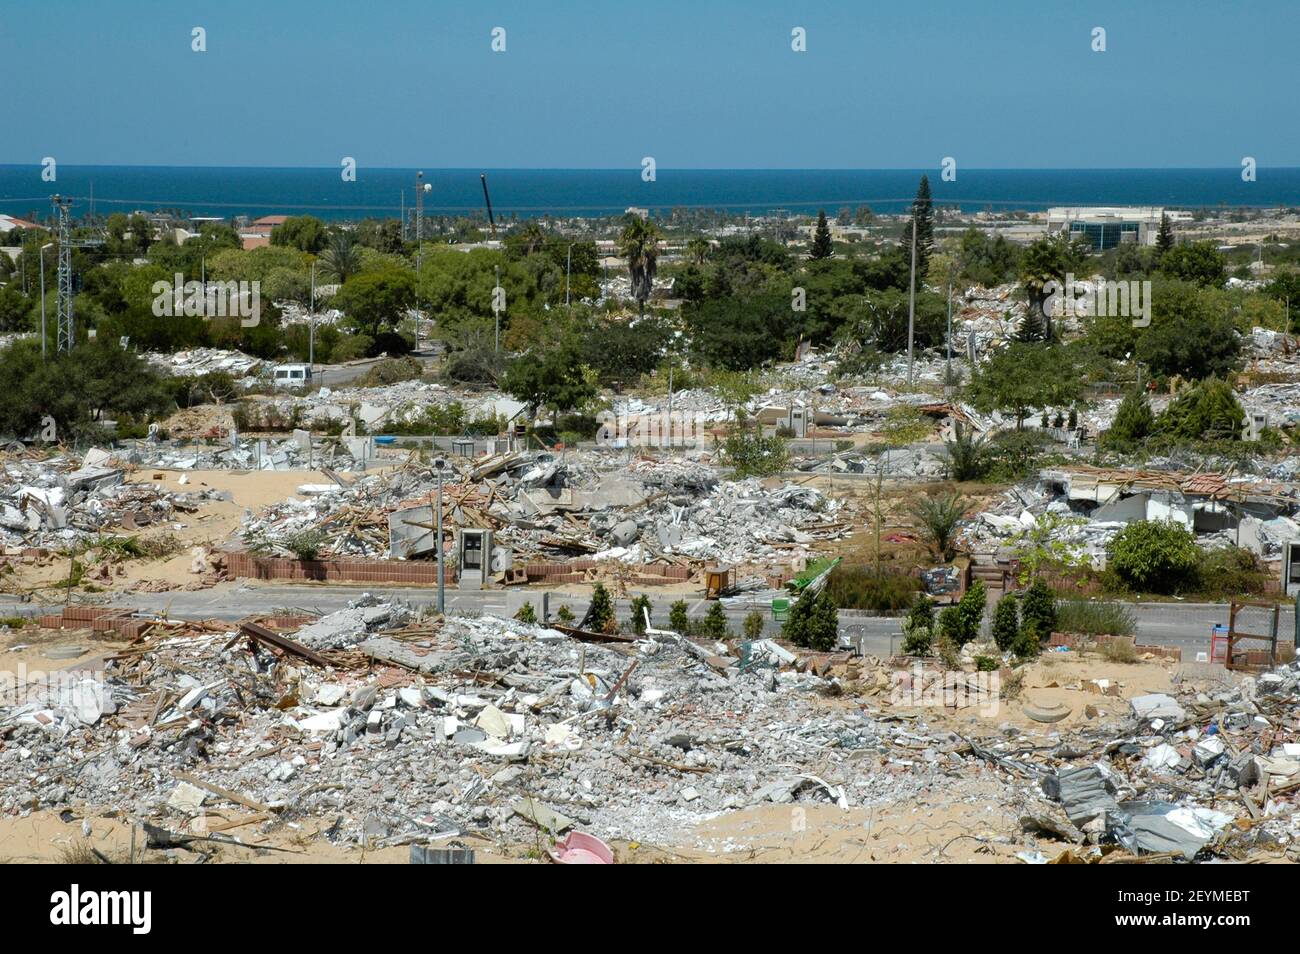 Mounds of rubble of demolished houses in what used to be the Jewish settlement of Neve Dekalim in Gaza Strip on 06 September 2005. Israel completed the evacuation of all 8,000 Jewish settlers from Gaza and several hundred more from four enclaves in the northern West Bank, after nearly 40 years of occupation. Stock Photo